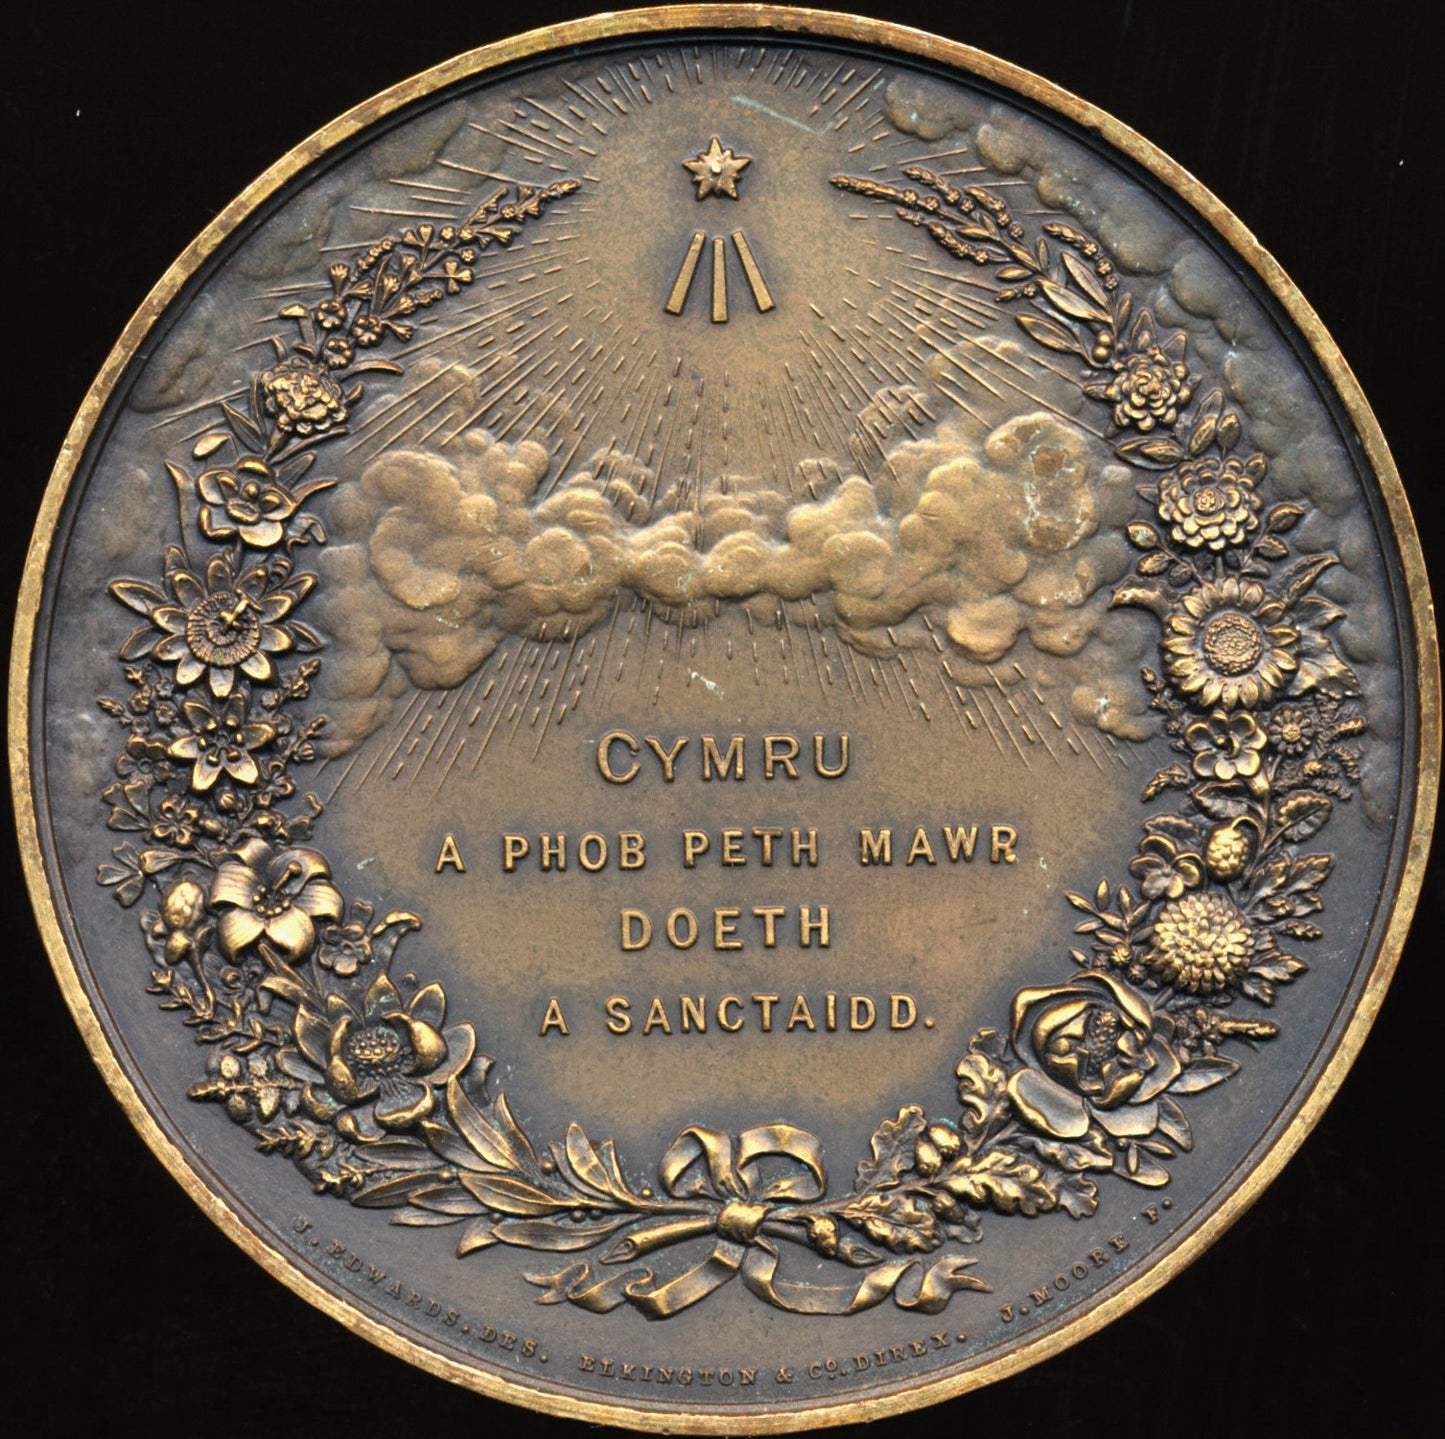 1883 (c) Honourable Society Of Cymmrodorion 63mm oxidised bronze medal